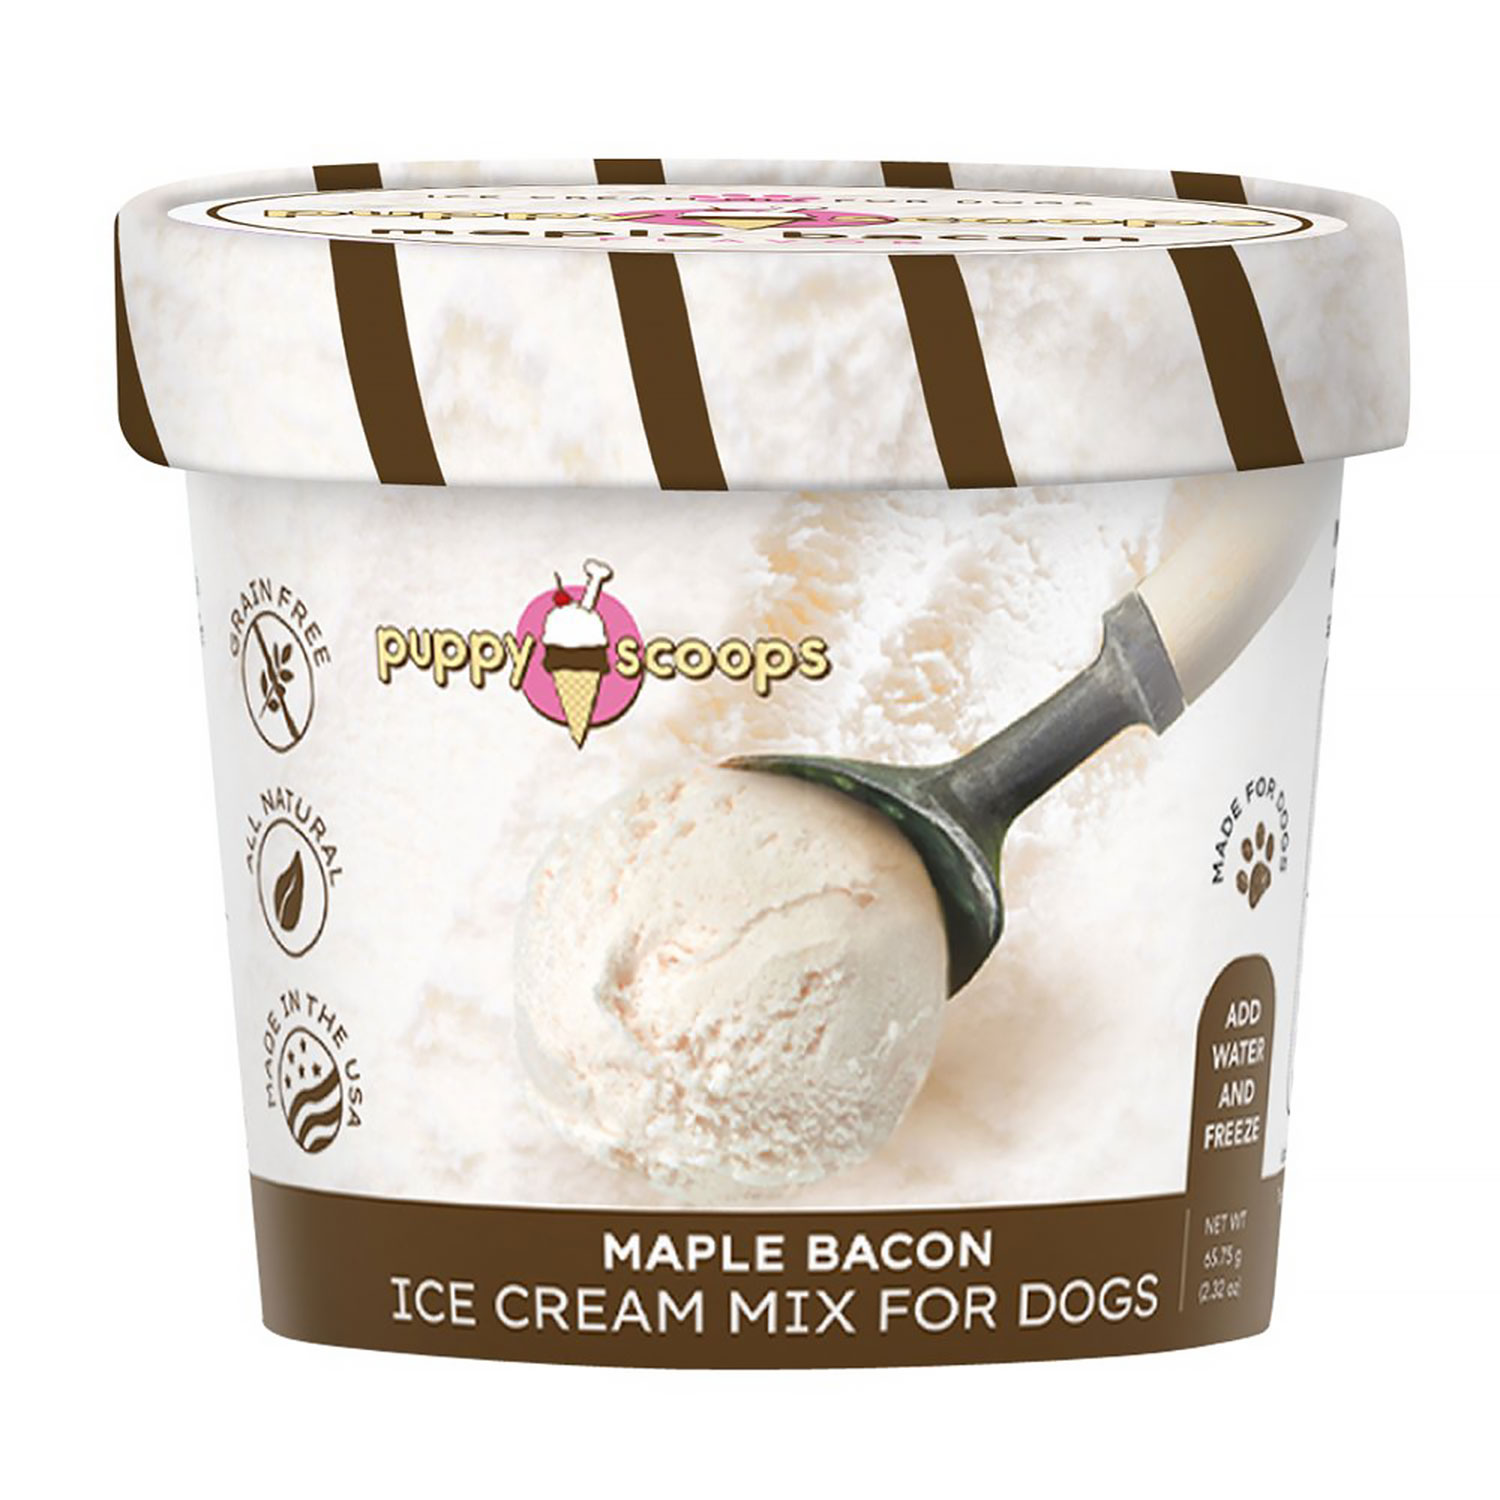 Ice Cream Mix For Dogs - Small Maple Bacon